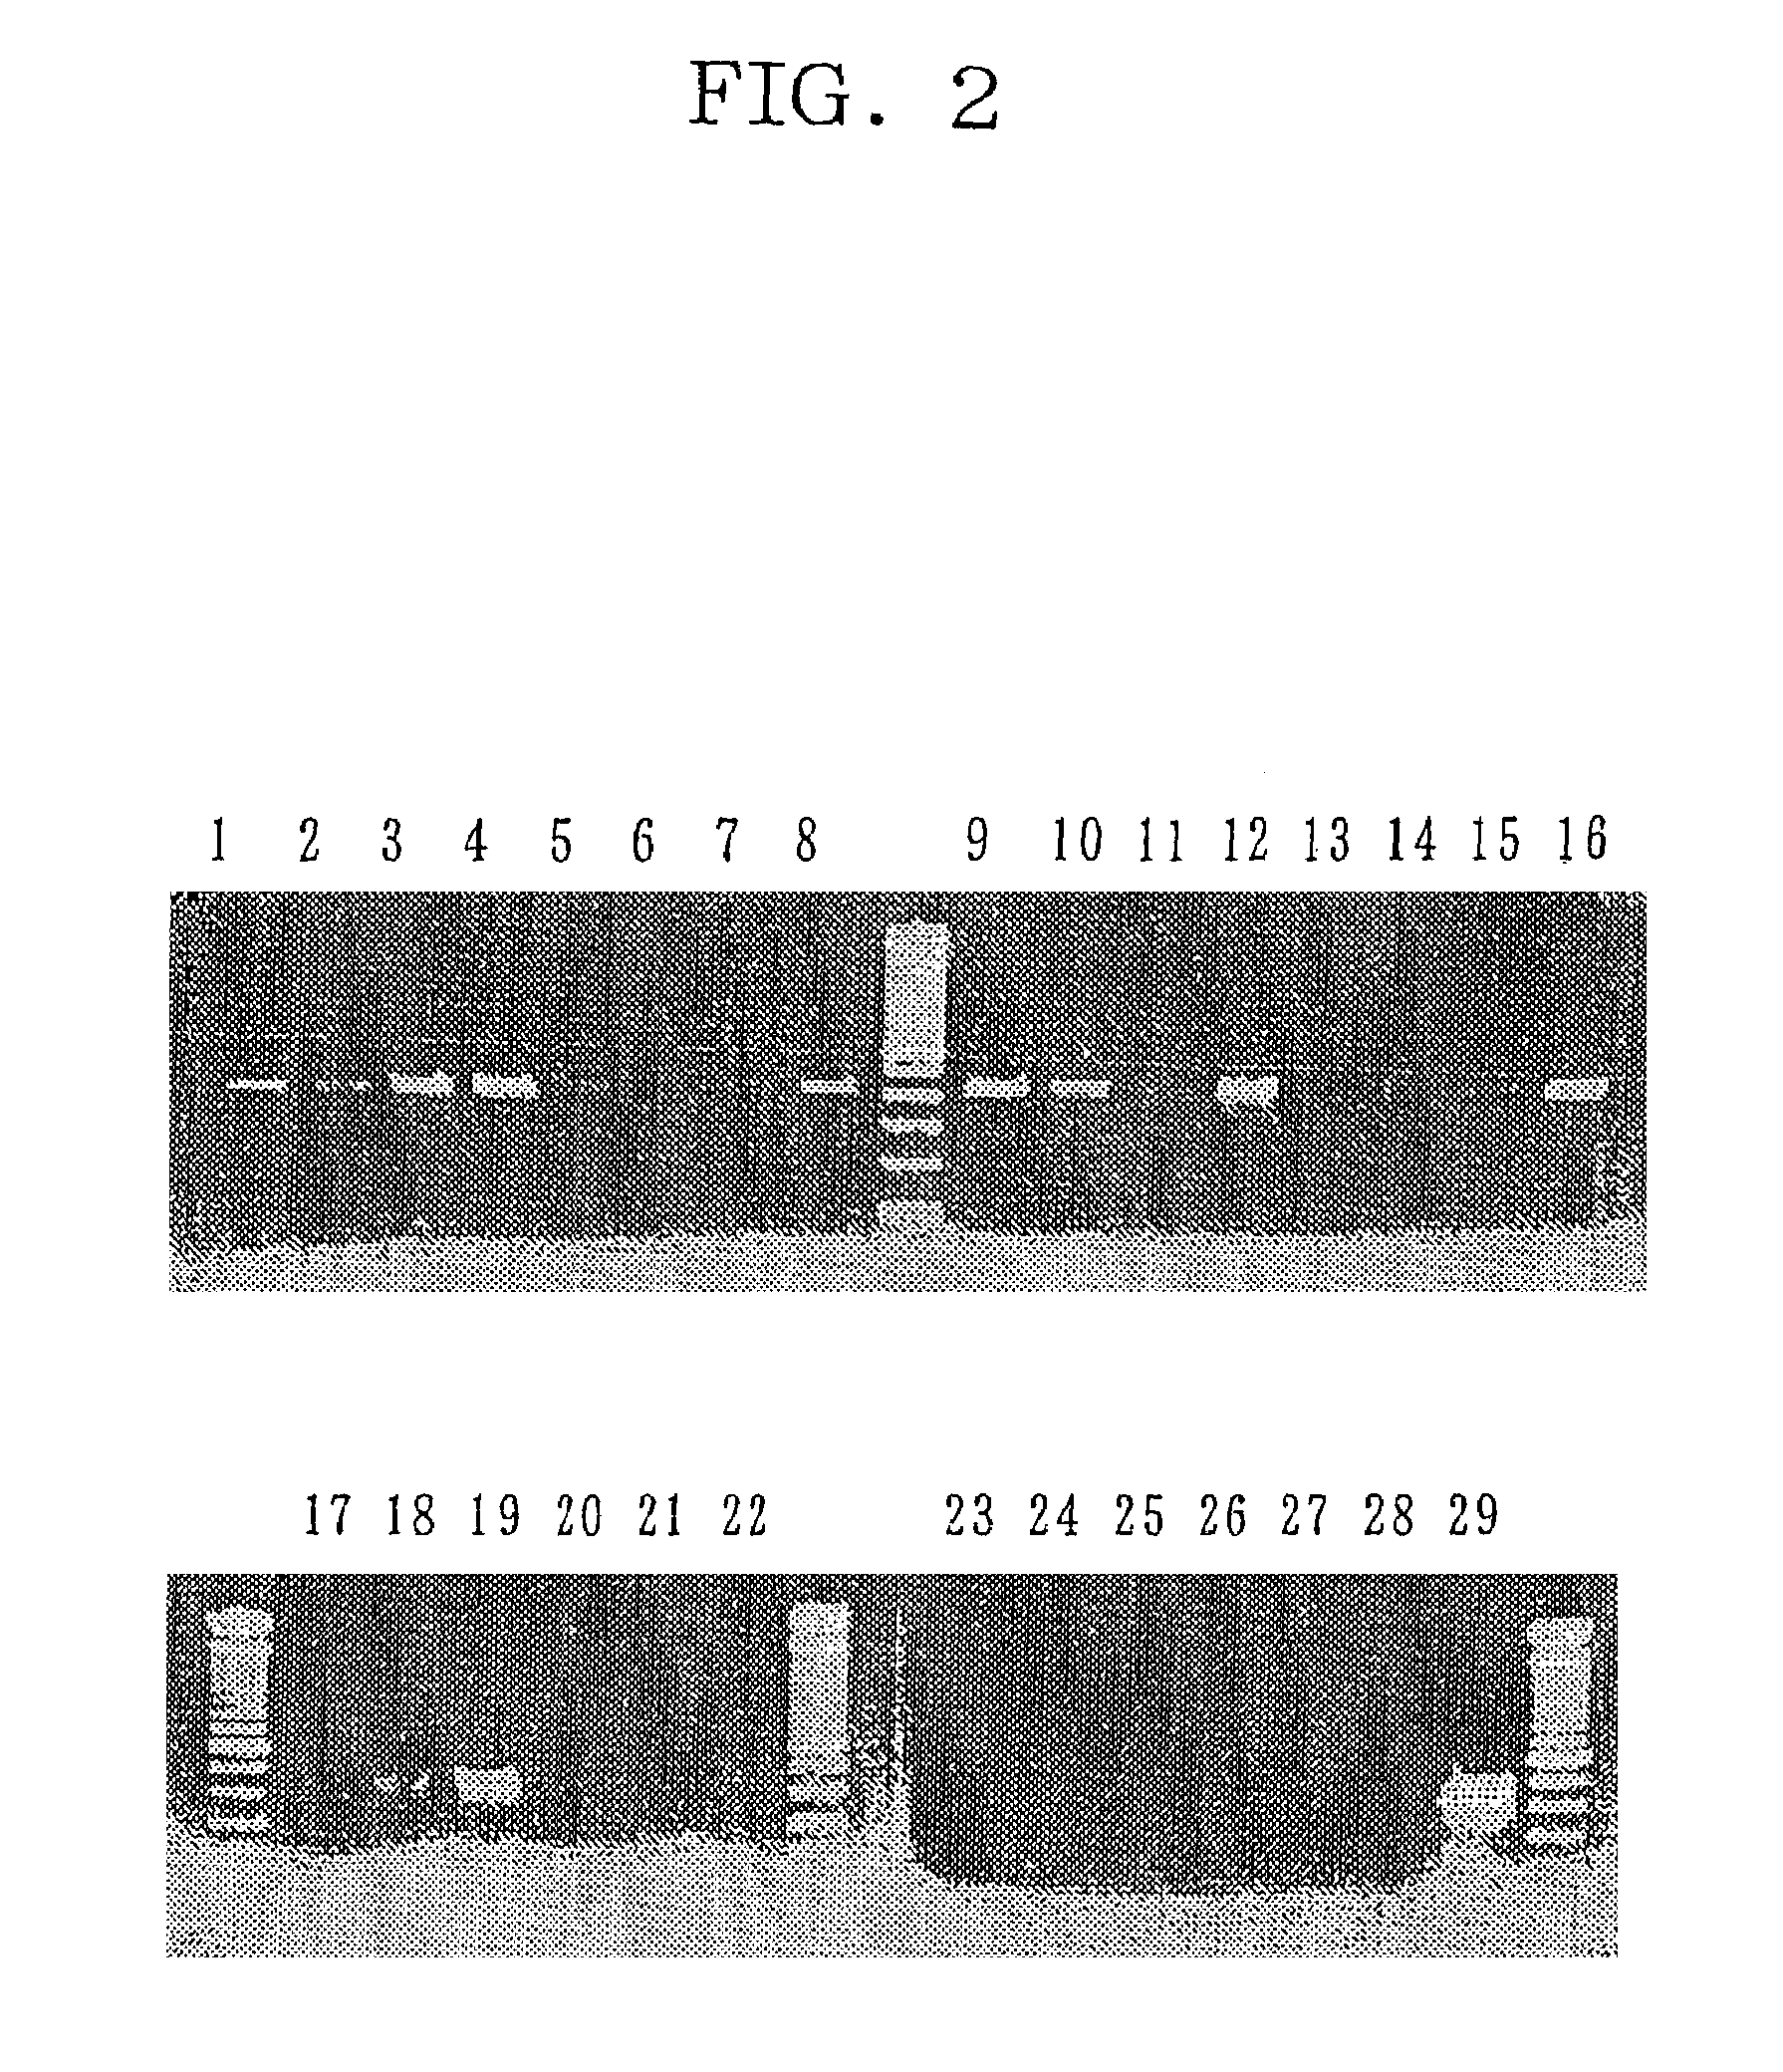 Insulin/IGF/relaxin family polypeptides and DNAS thereof